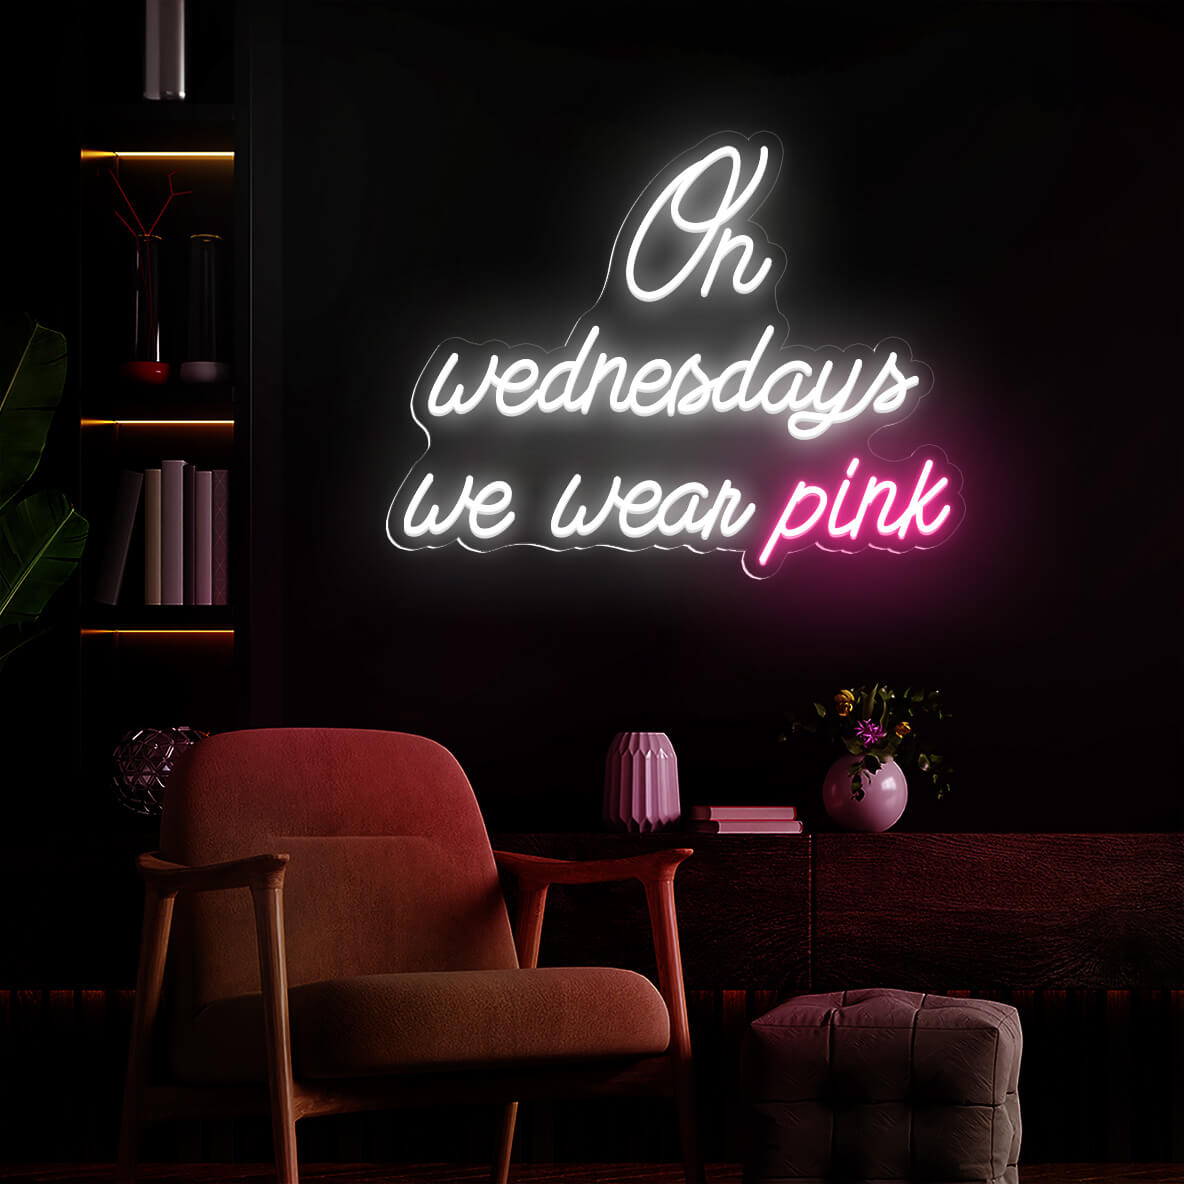 On wednesday we wear pink 6